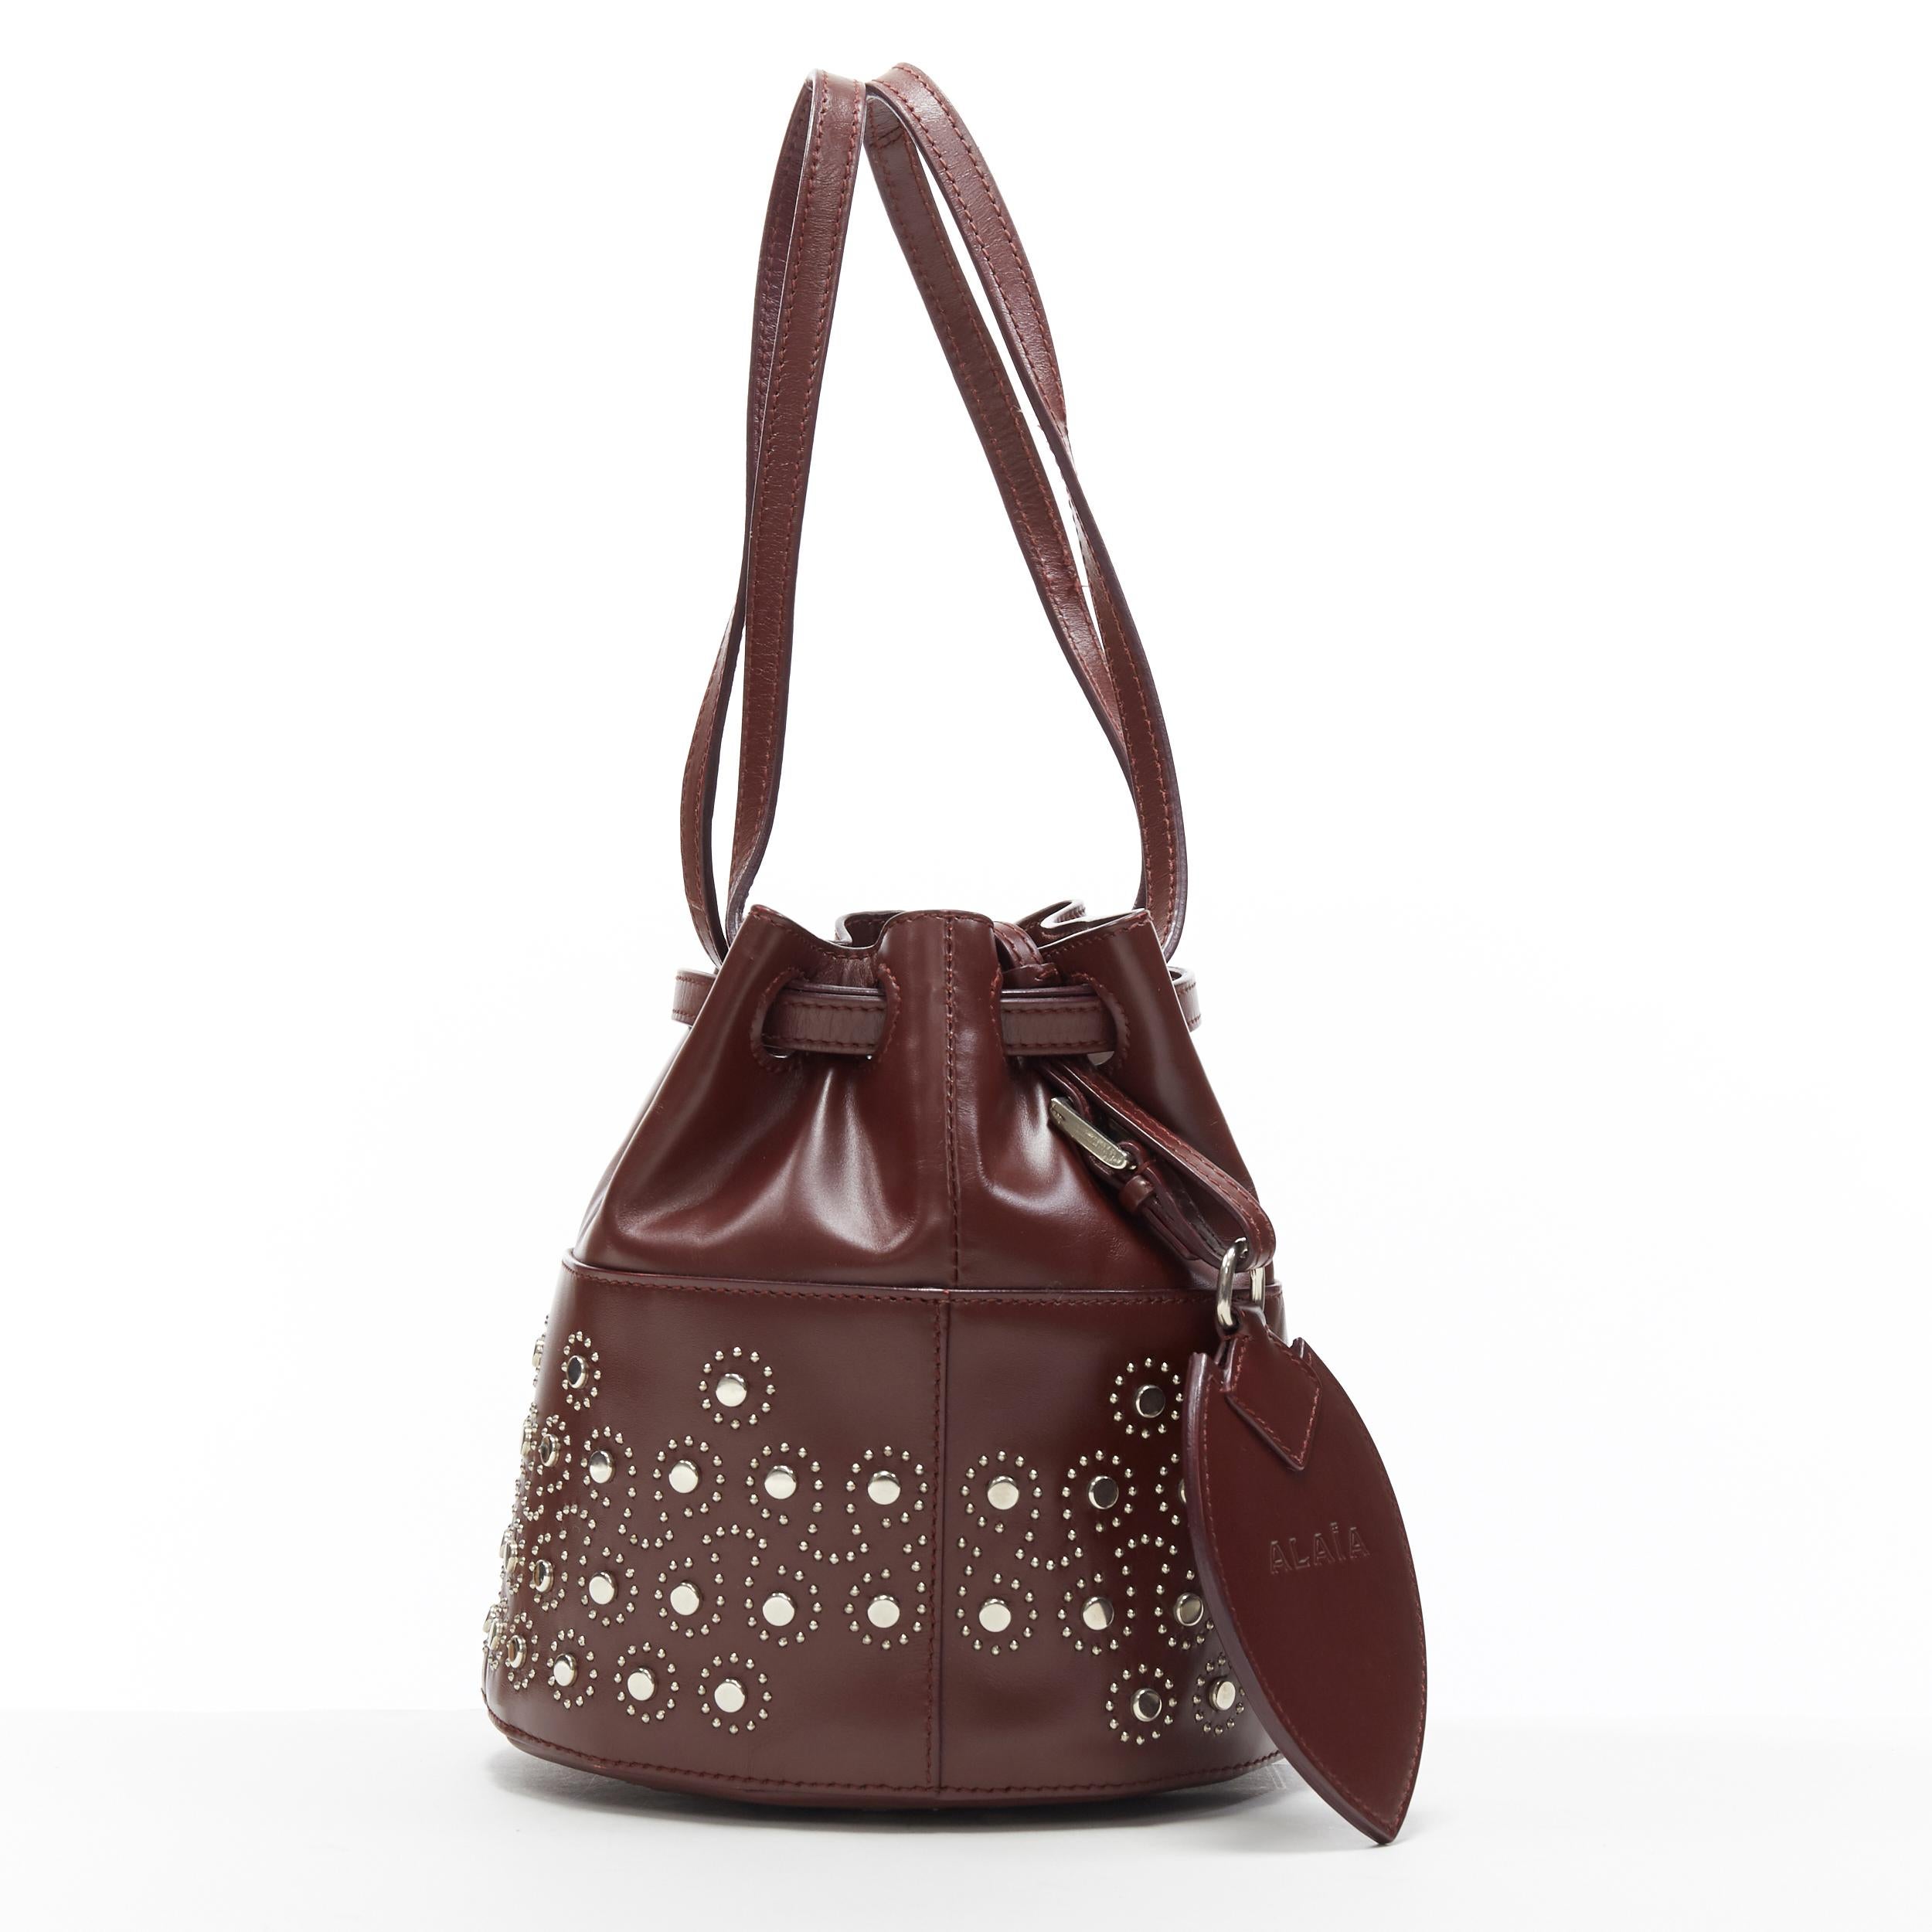 ALAIA burgundy red geometric silver studded drawstring mirror charm bucket bag 
Reference: TGAS/A05207 
Brand: Alaia 
Designer: Azzedine Alaia 
Model: Studded bucket bag 
Material: Leather 
Color: Burgundy 
Pattern: Solid 
Closure: Drawstring 
Made